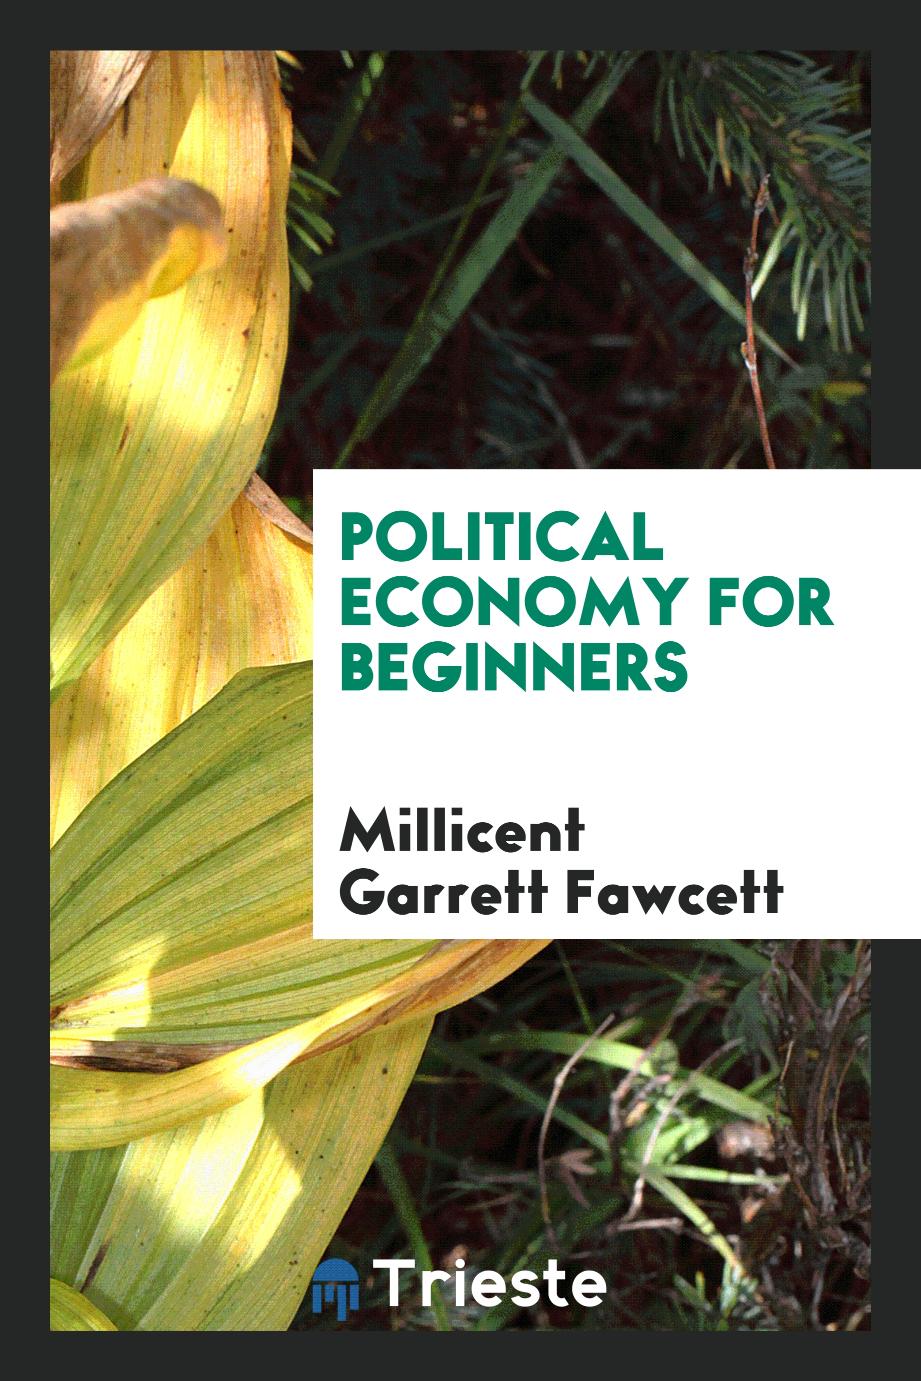 Political economy for beginners